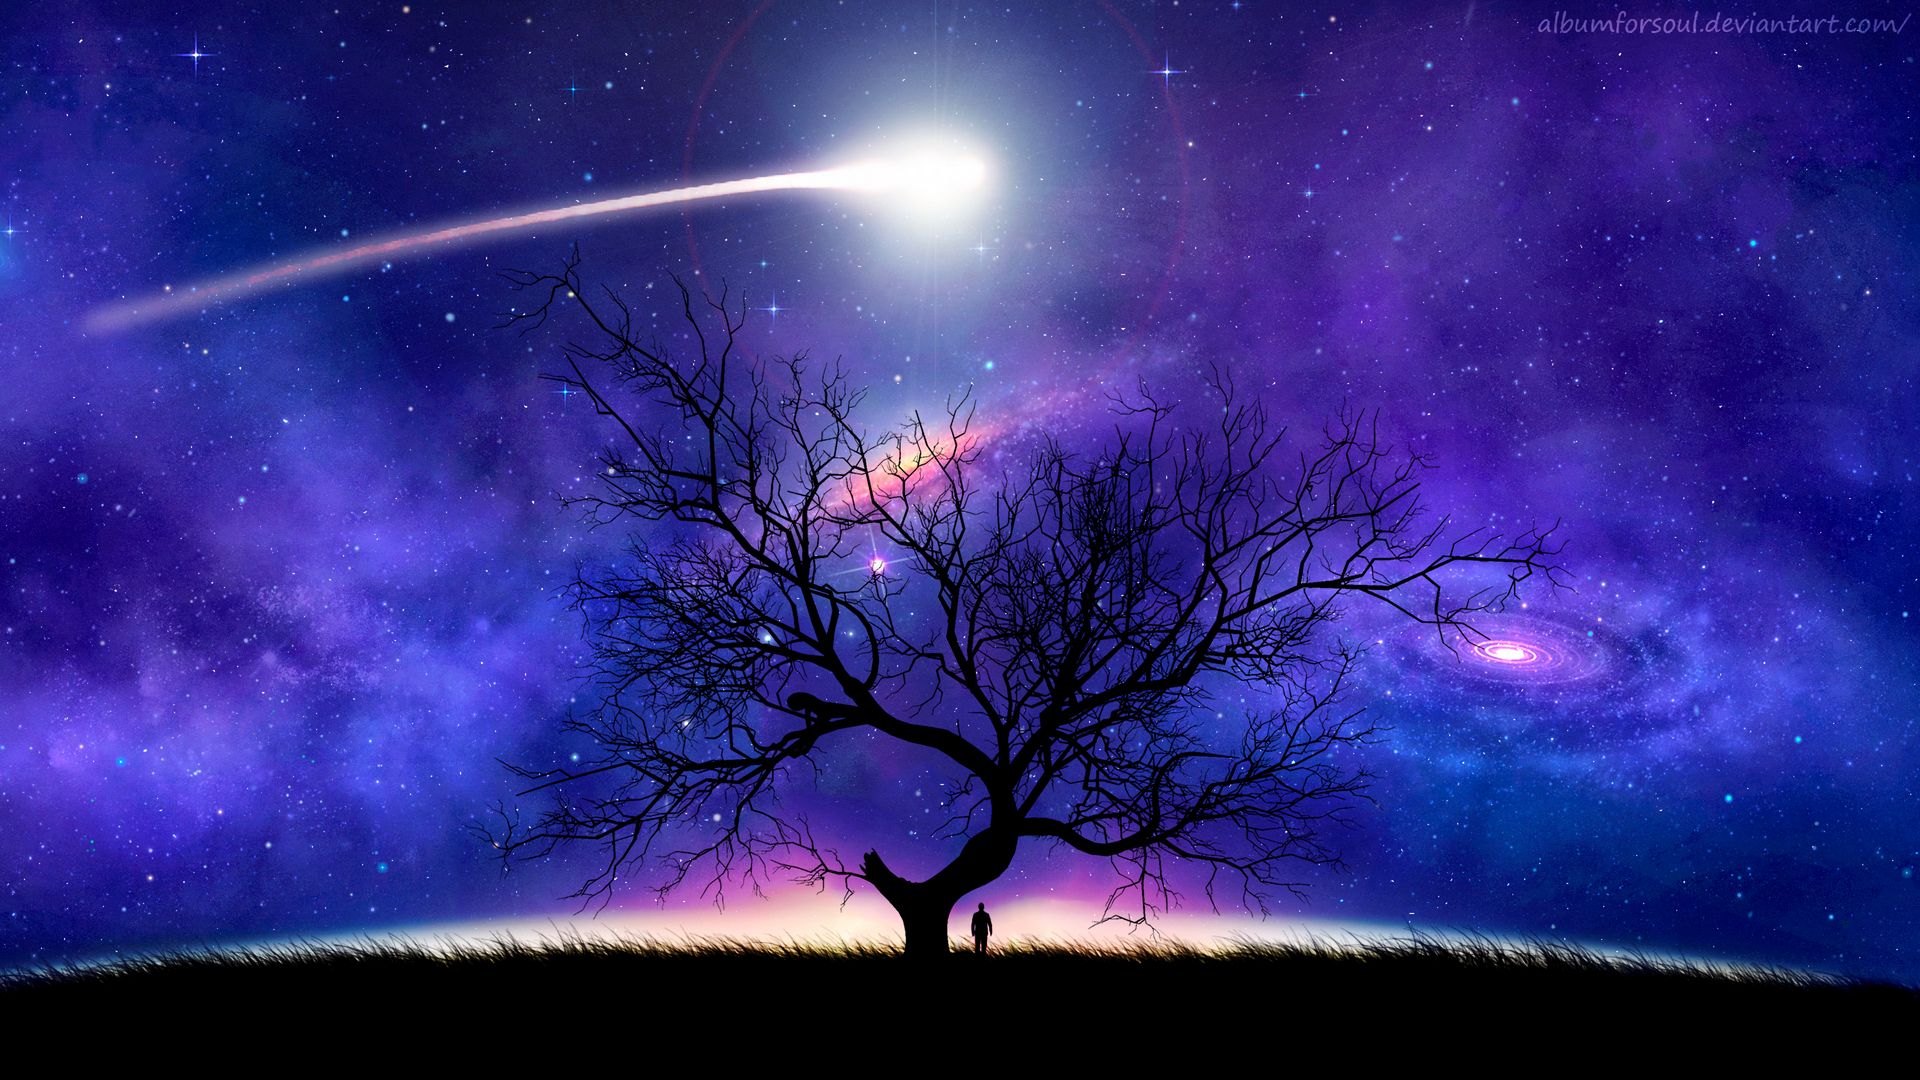 Download wallpaper 1920x1080 tree, silhouette, space, night, starry sky, comet full hd, hdtv, fhd, 1080p HD background